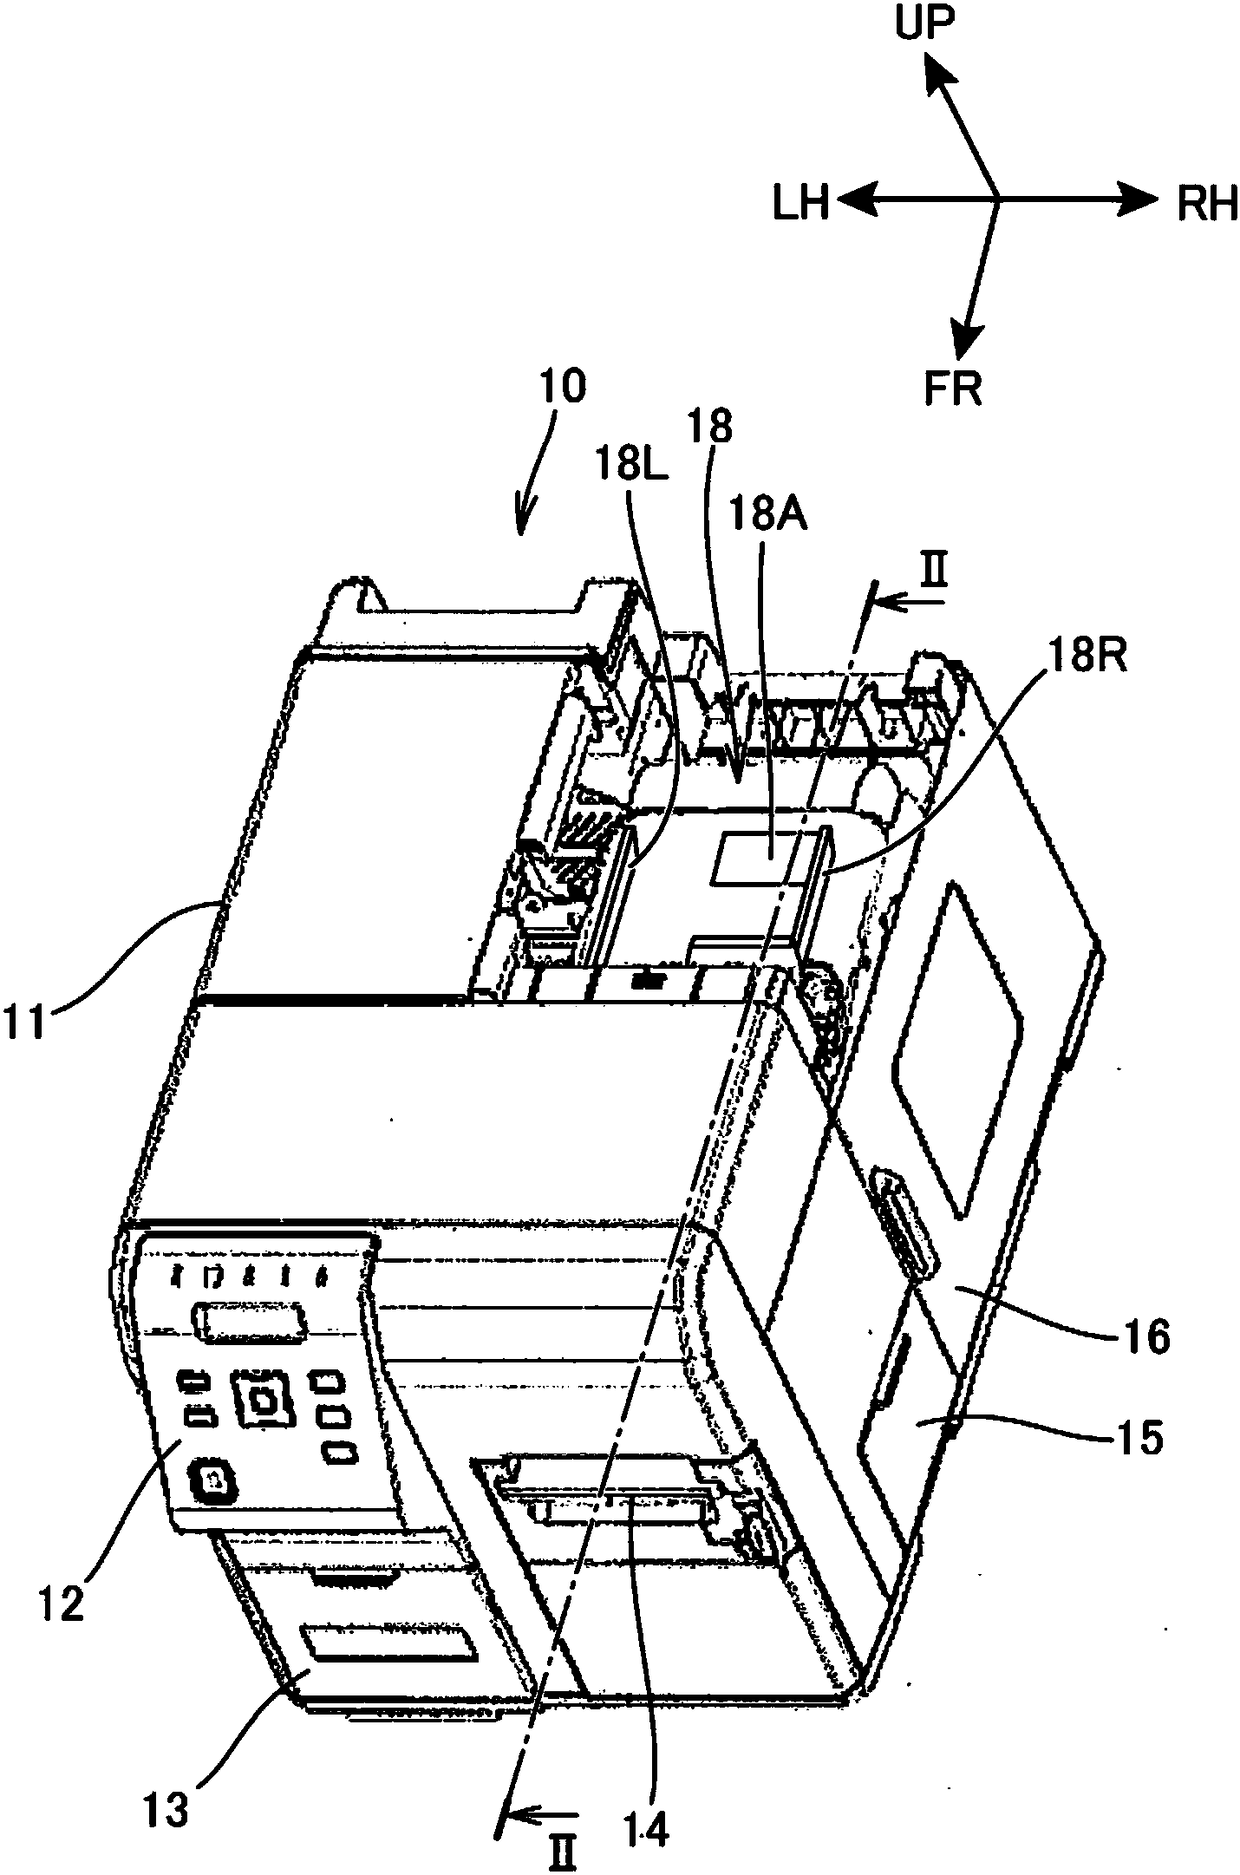 Printer and conveyance device